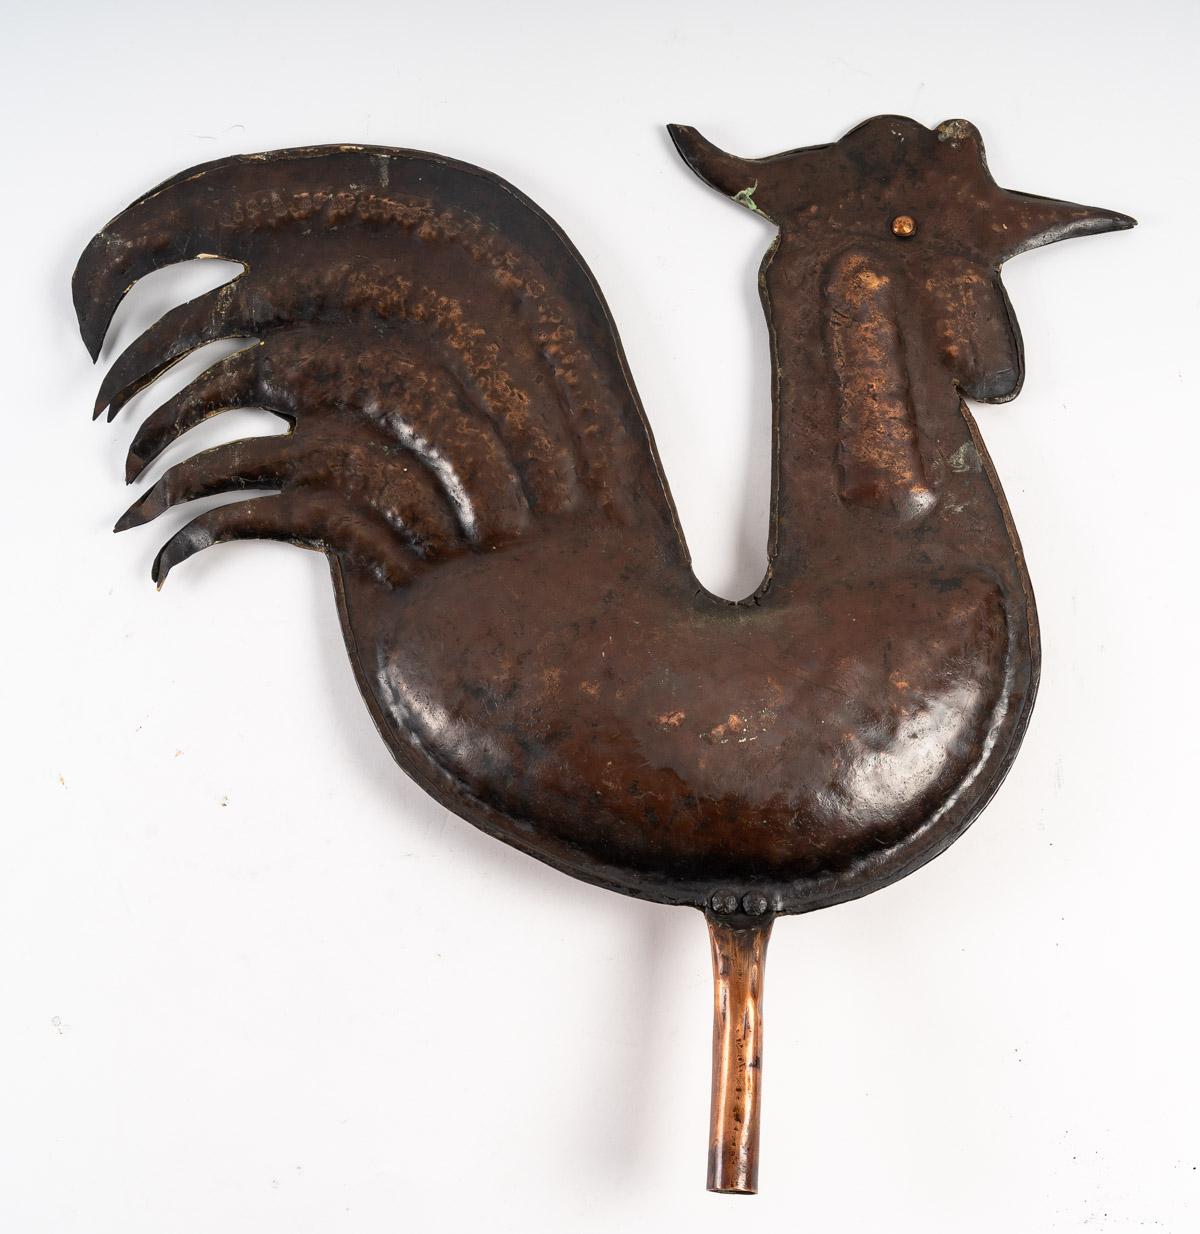 Pewter weathervane representing a Rooster
French work from the second half of the 18th century 
Measures: Height : 52 cm / Width : 52 cm.